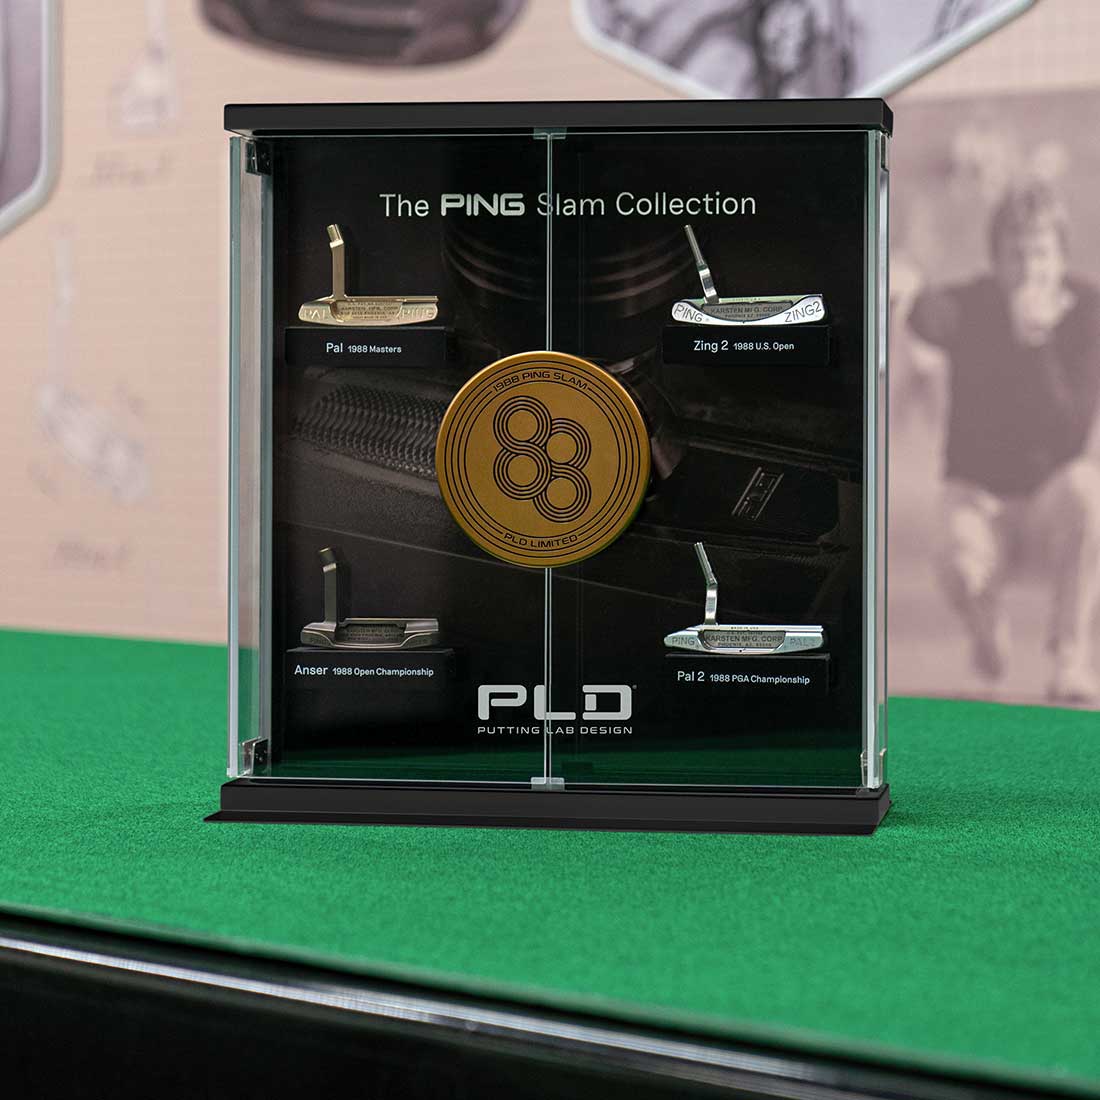 PING Slam Collection Display Case on Putting Green